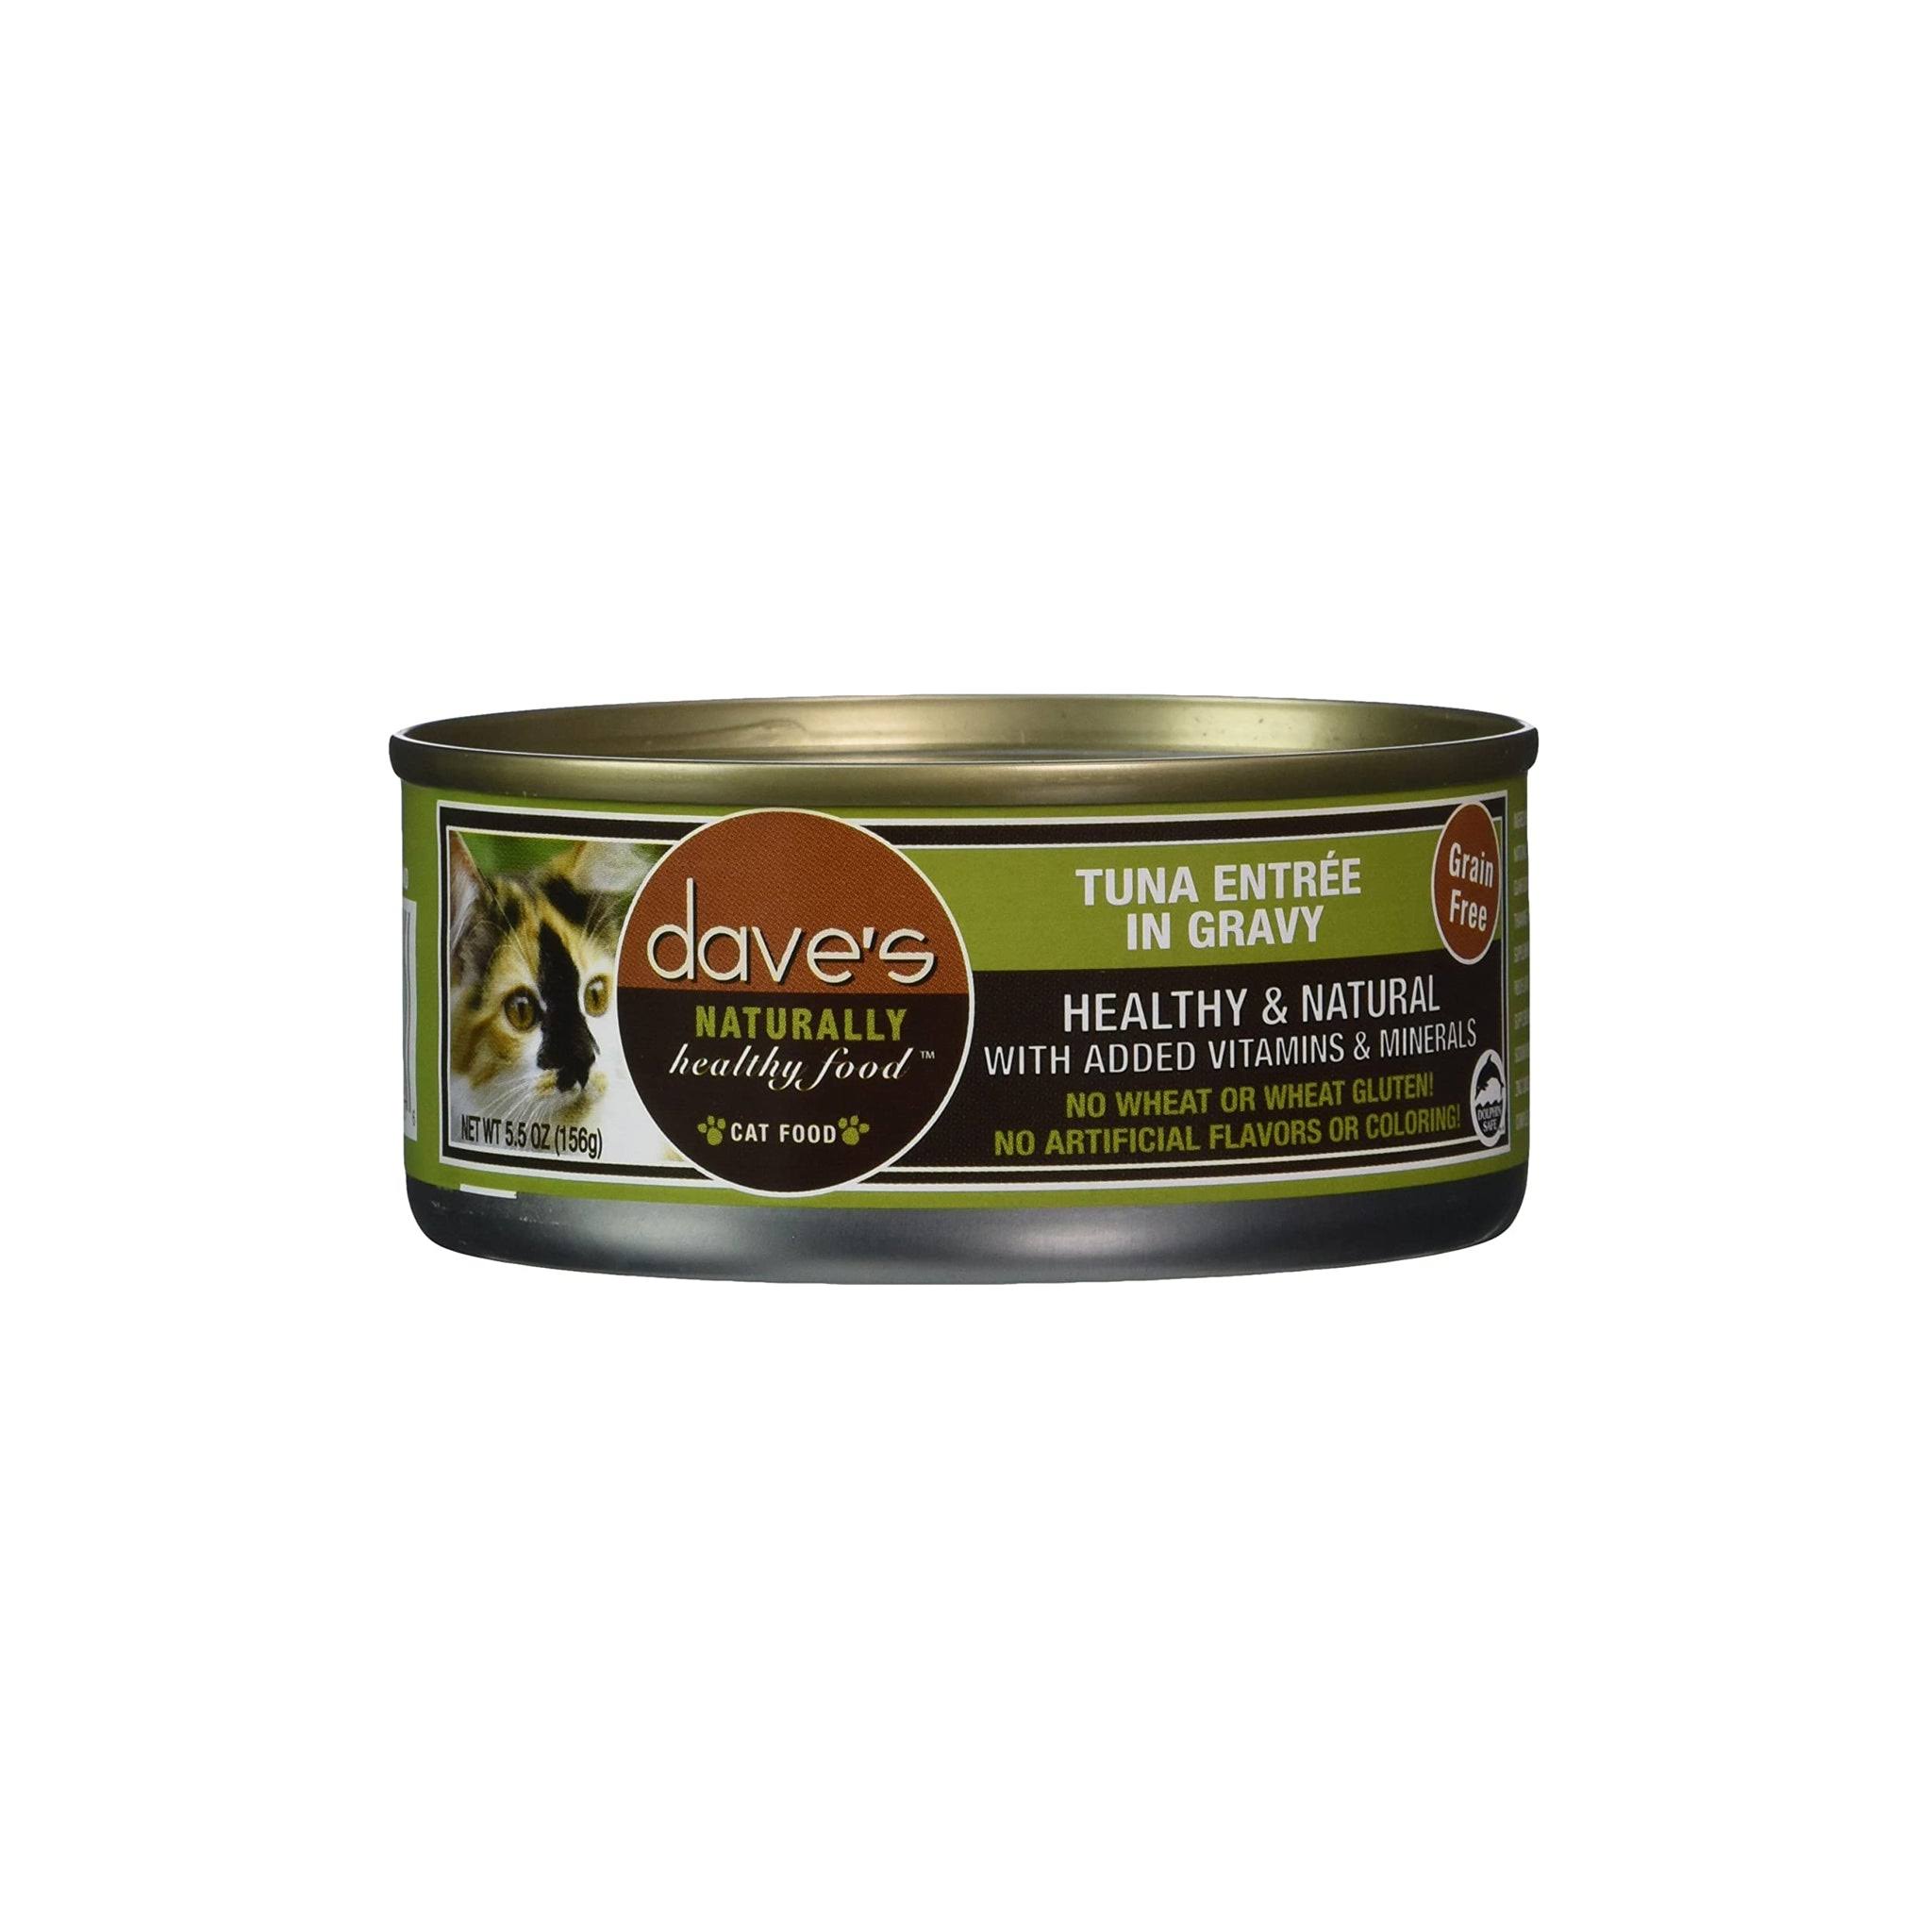 Dave's Naturally Healthy Food Cat Food - Tuna Entree In Gravy